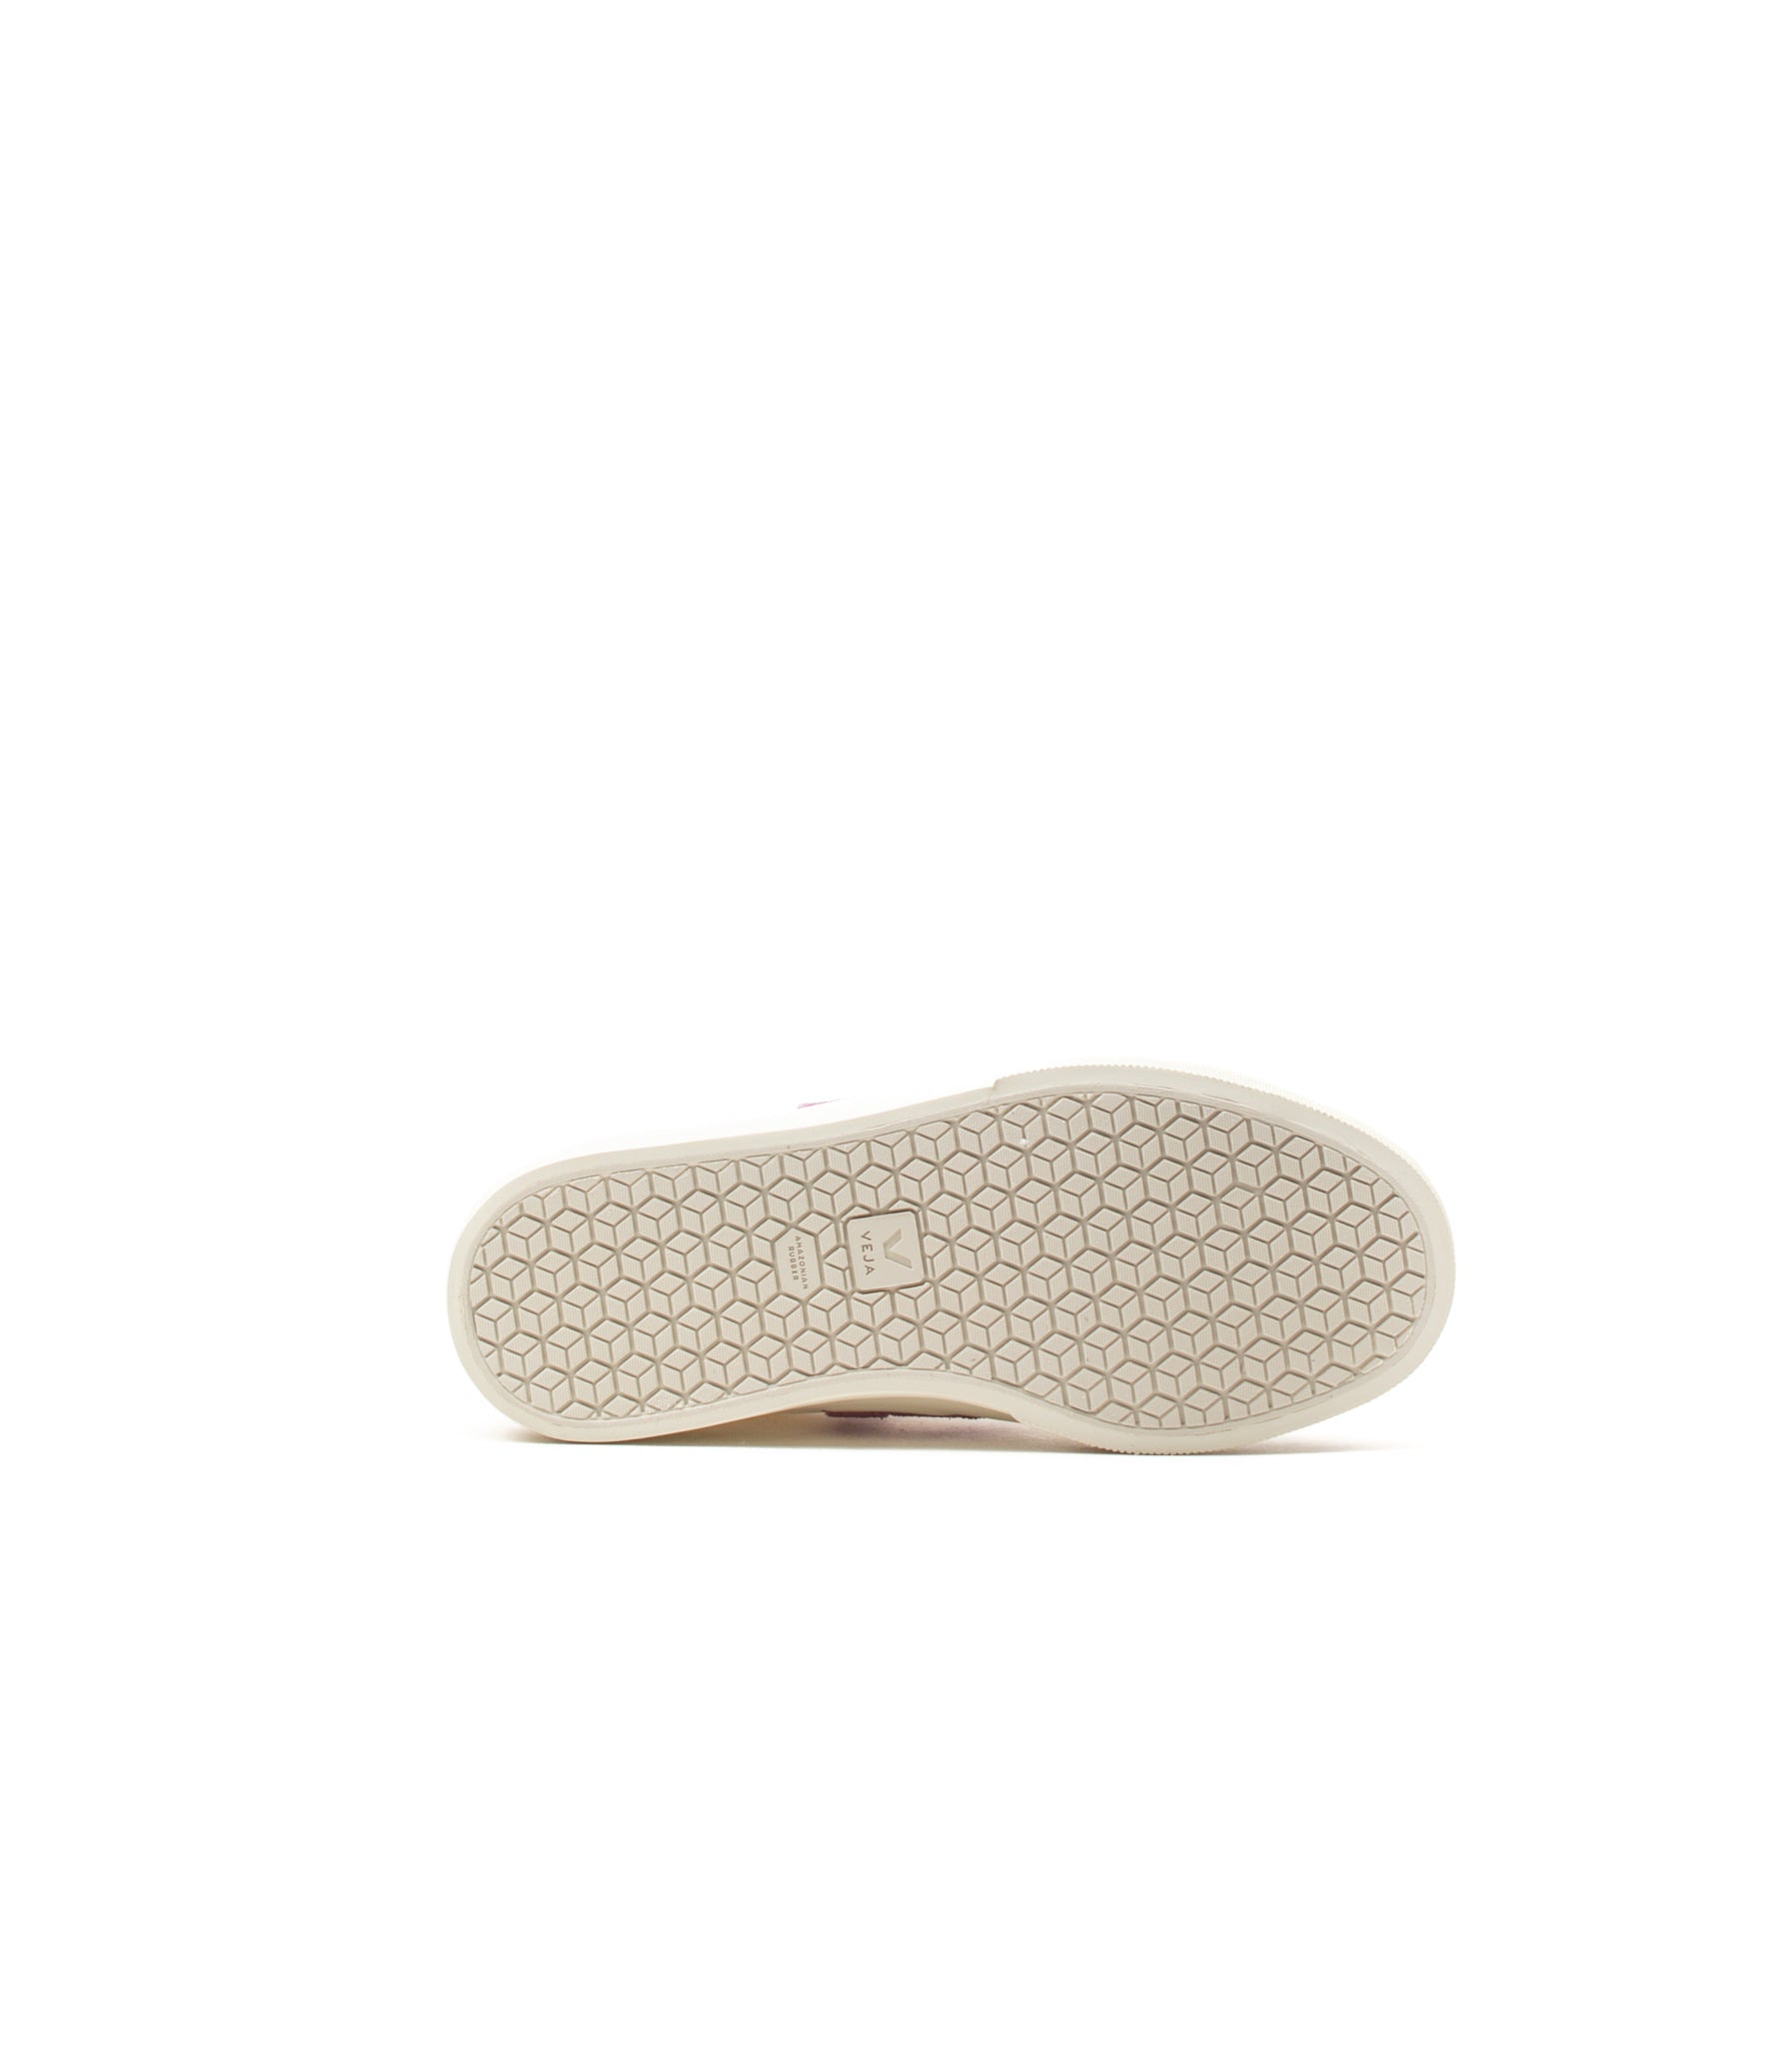 Veja Chromefree Leather Extra White Mulberry Donna